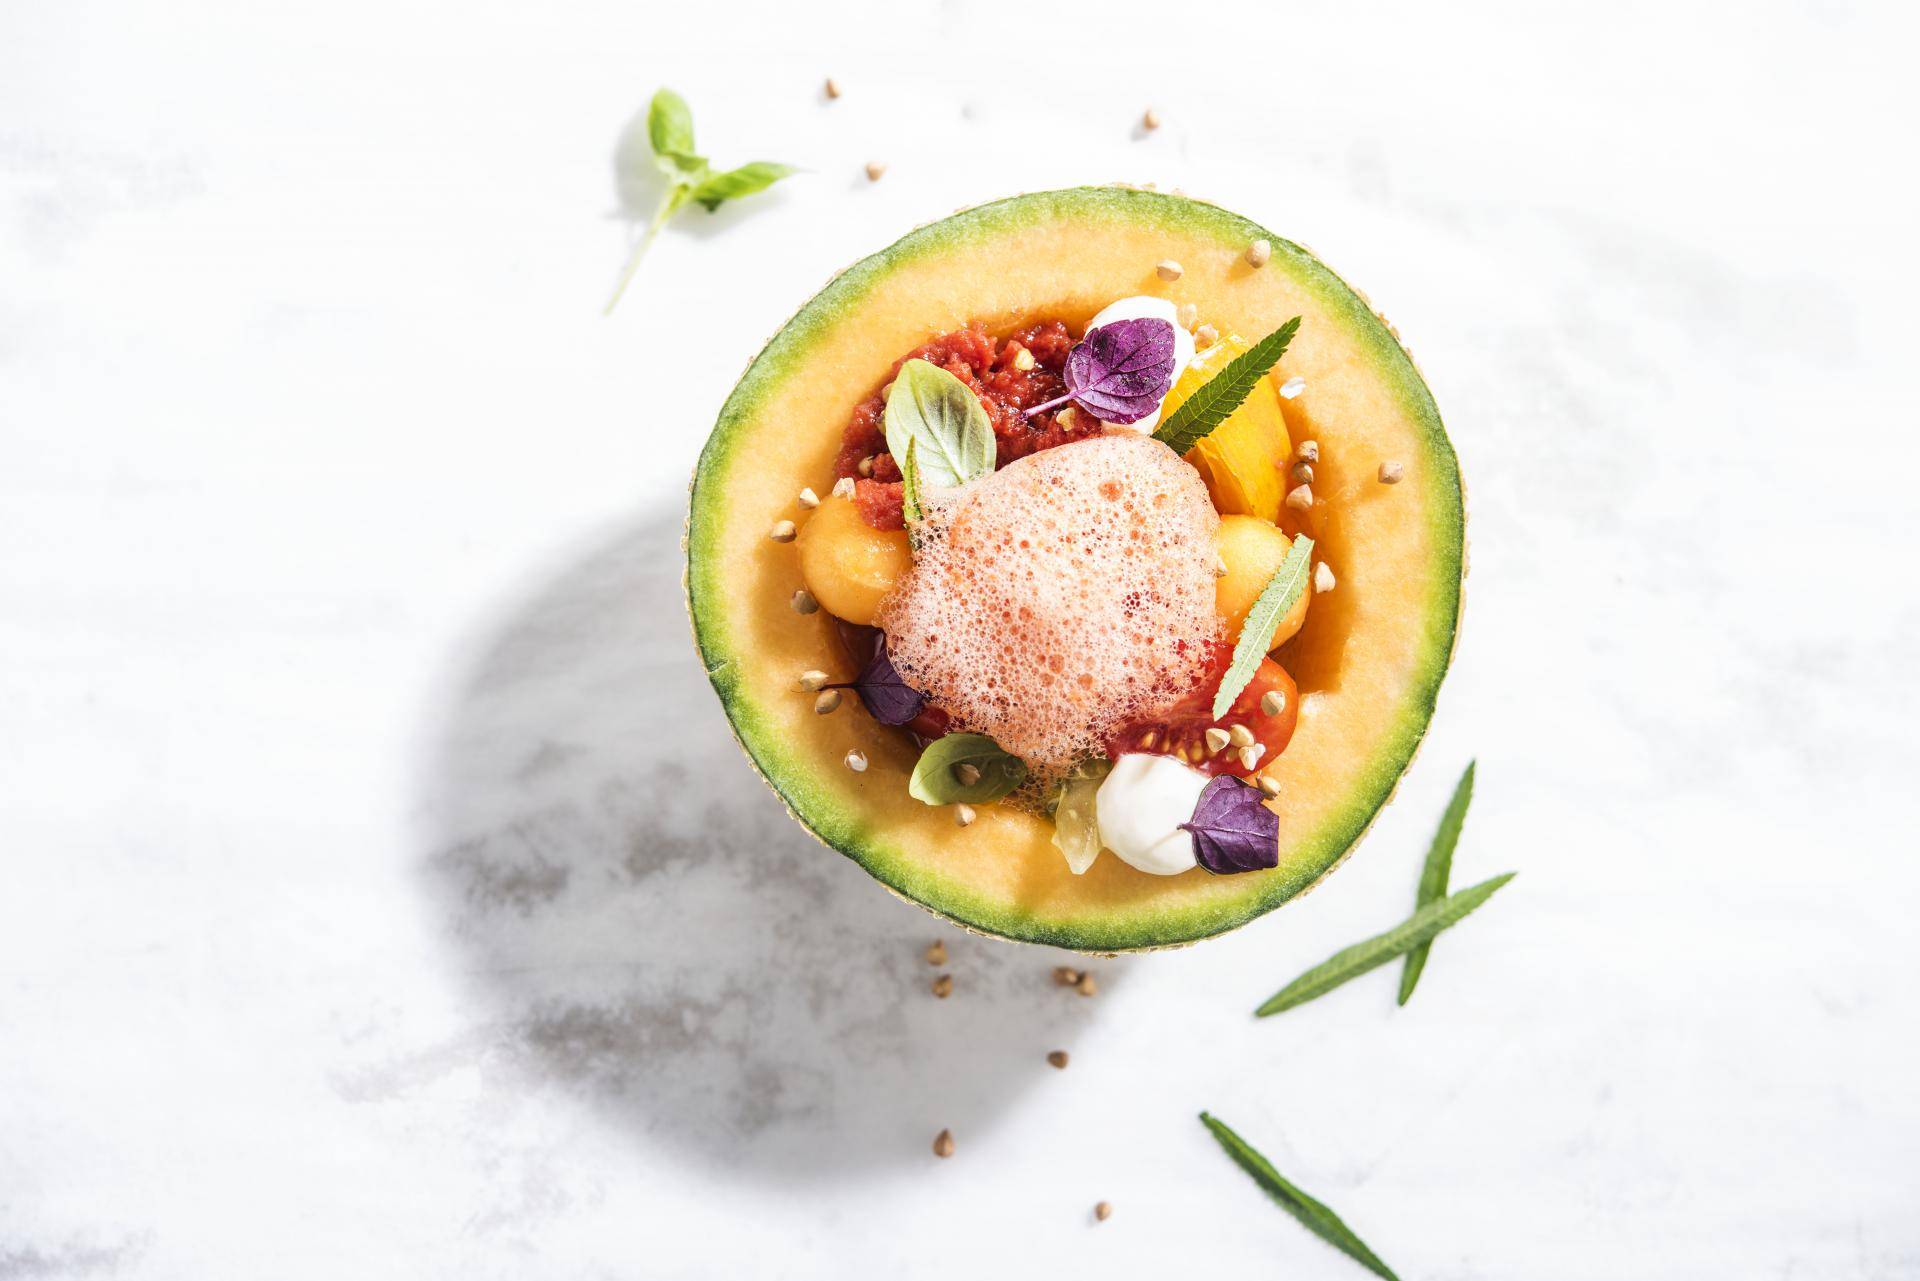 Cantaloupe with melon made with cacaofruit ingredients